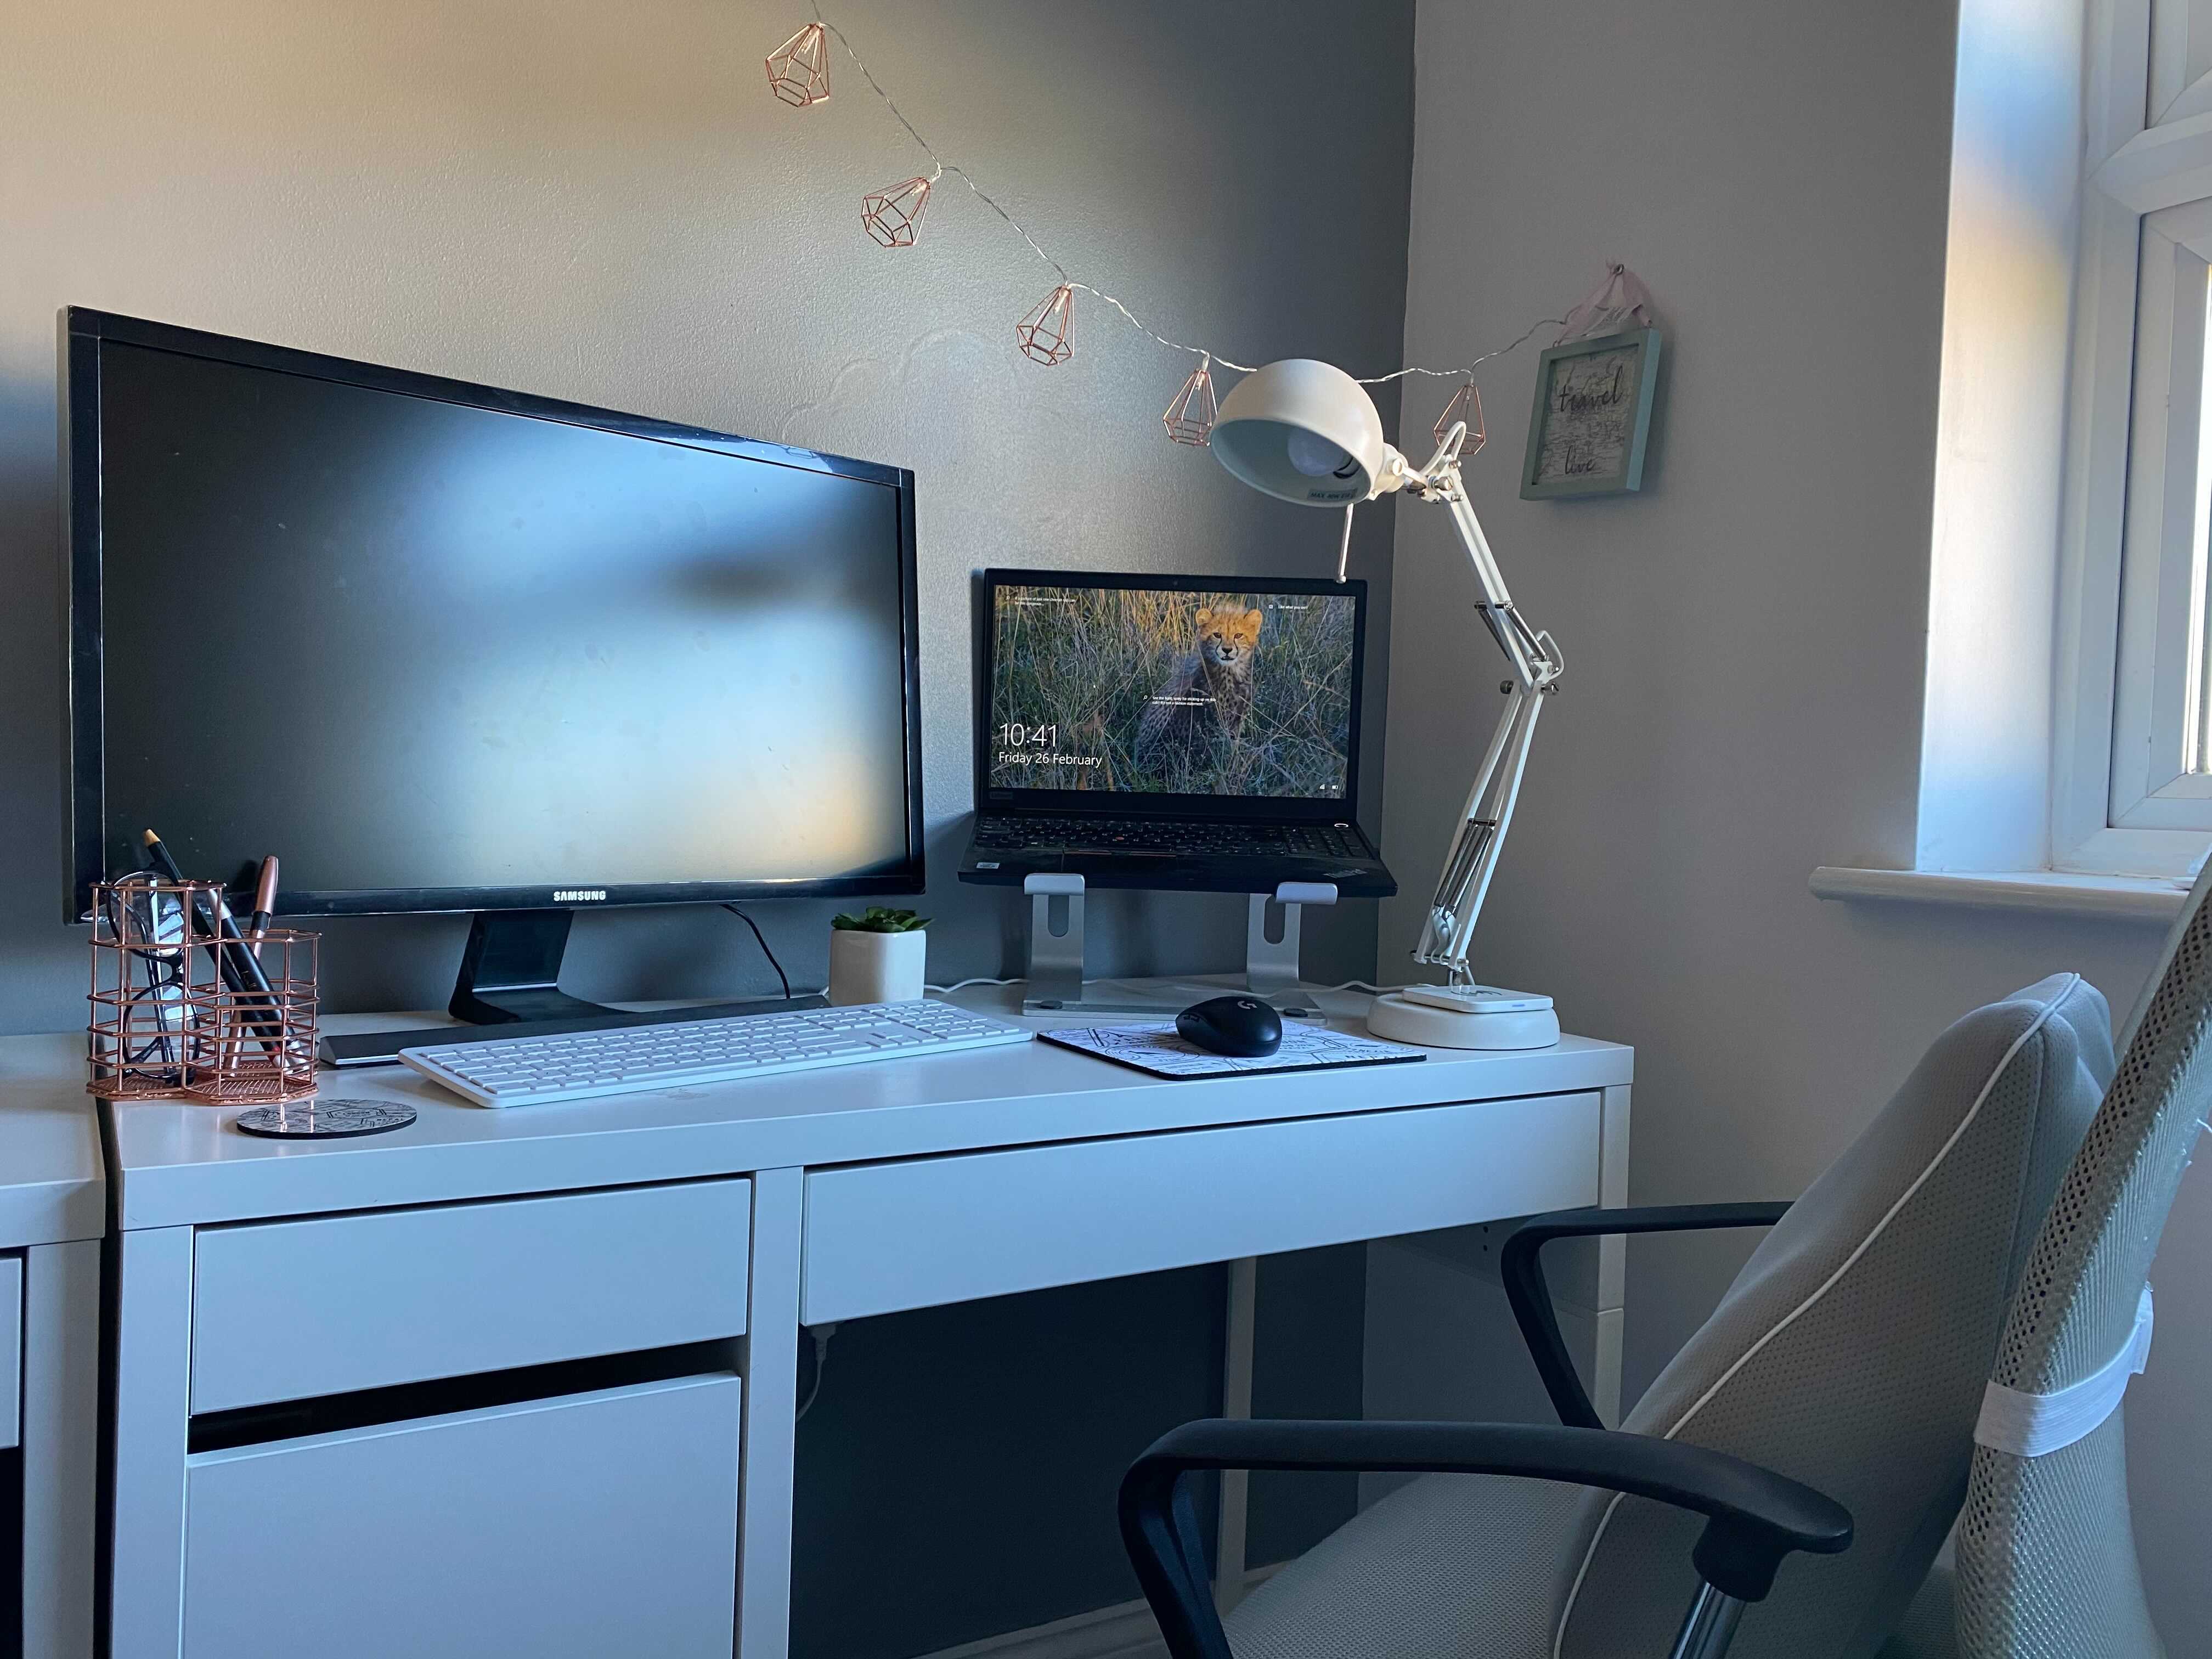 The Top Nine Tips to Improve your Home Office Setup